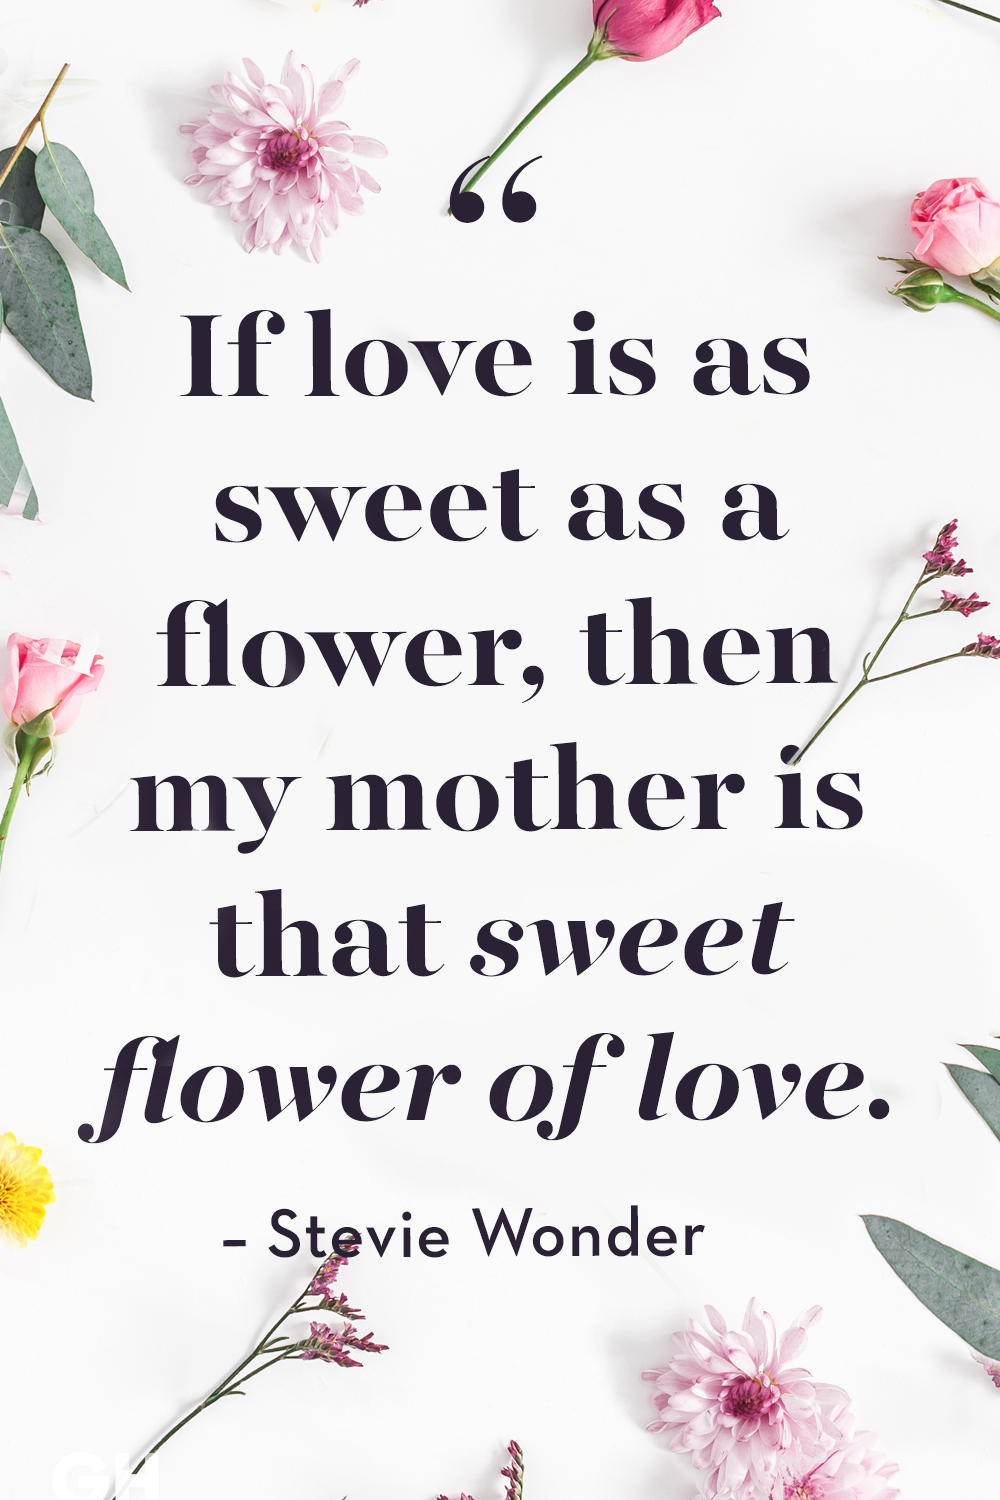 35 Best Mother's Day Quotes Heartfelt Sayings for Mothers Day